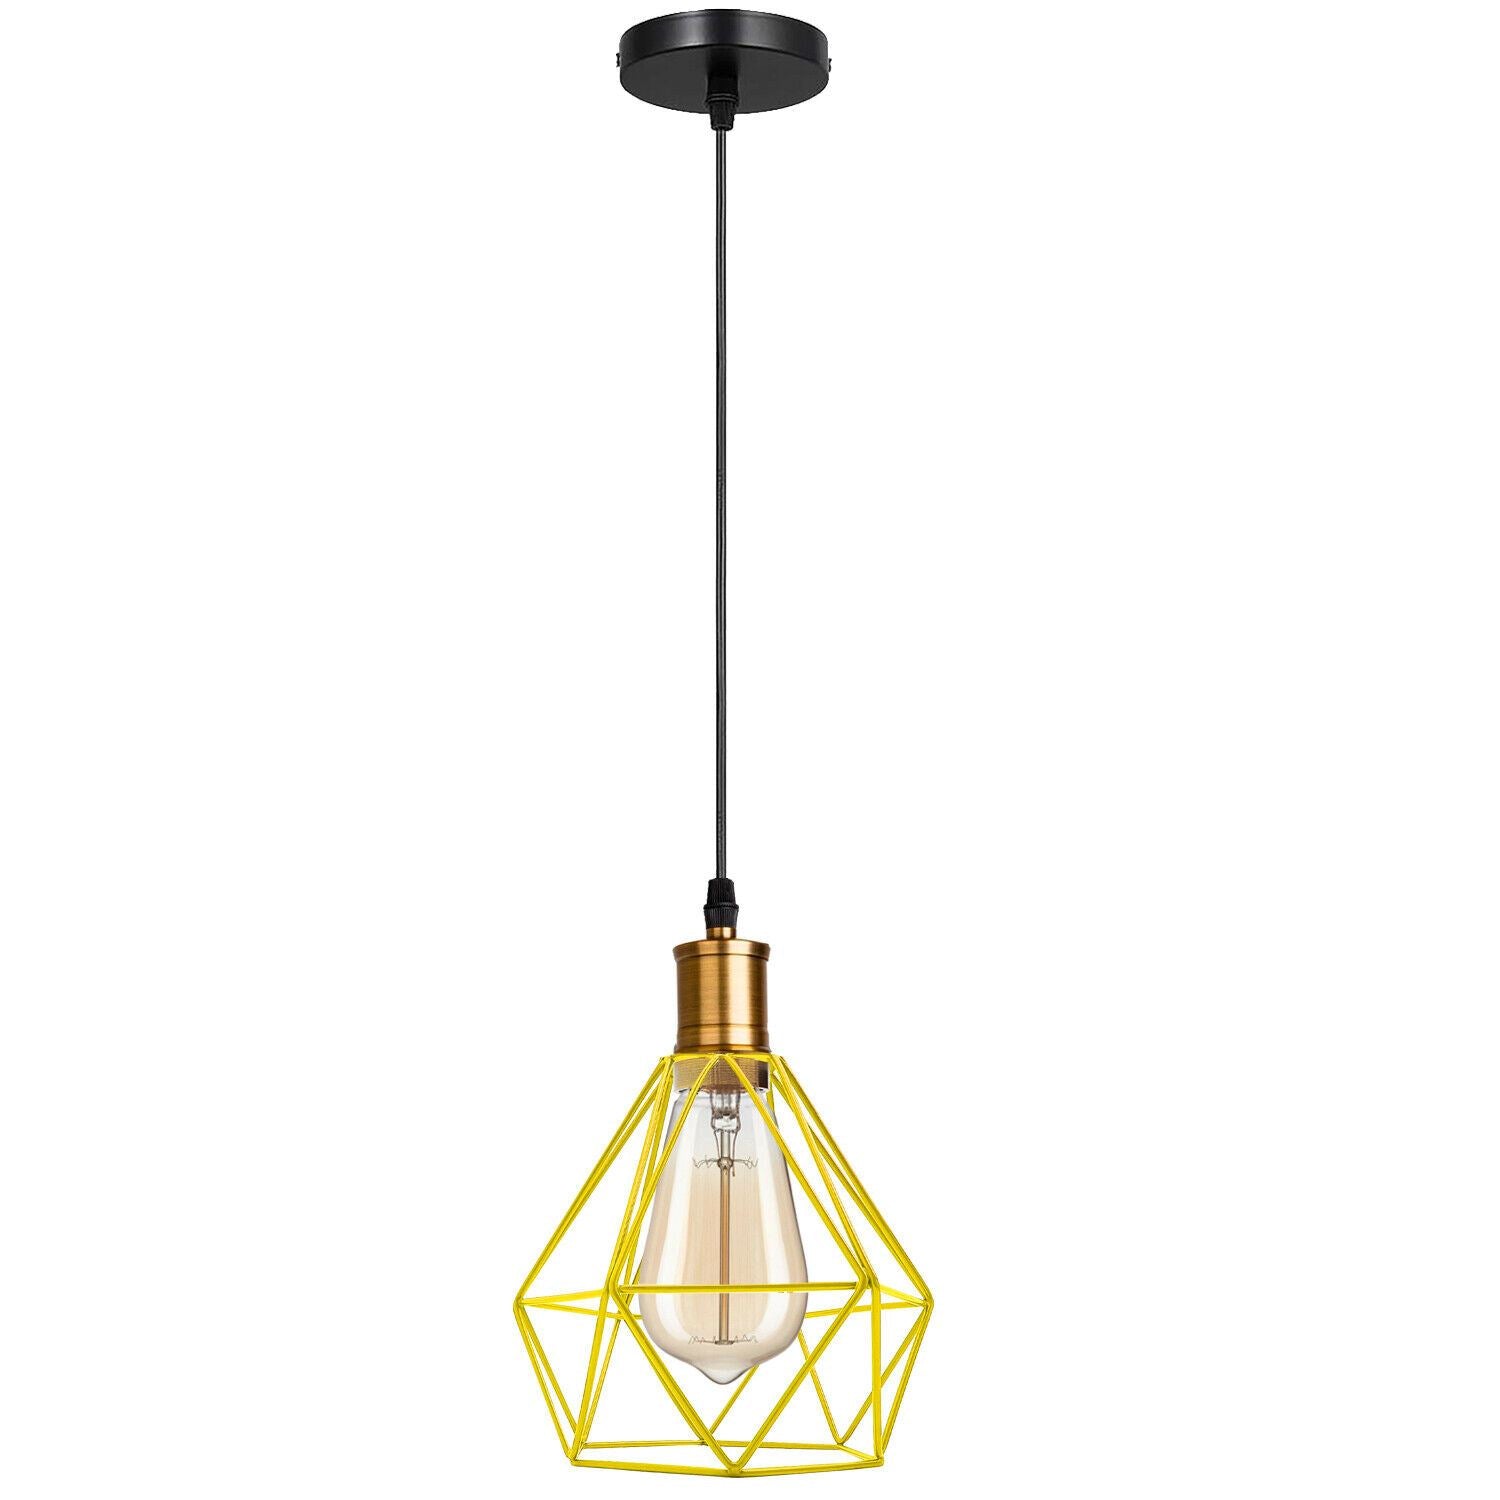 Modern Vintage Diamond Cage Pendant Light Fitting Geometric Wire Cage Style Hanging 